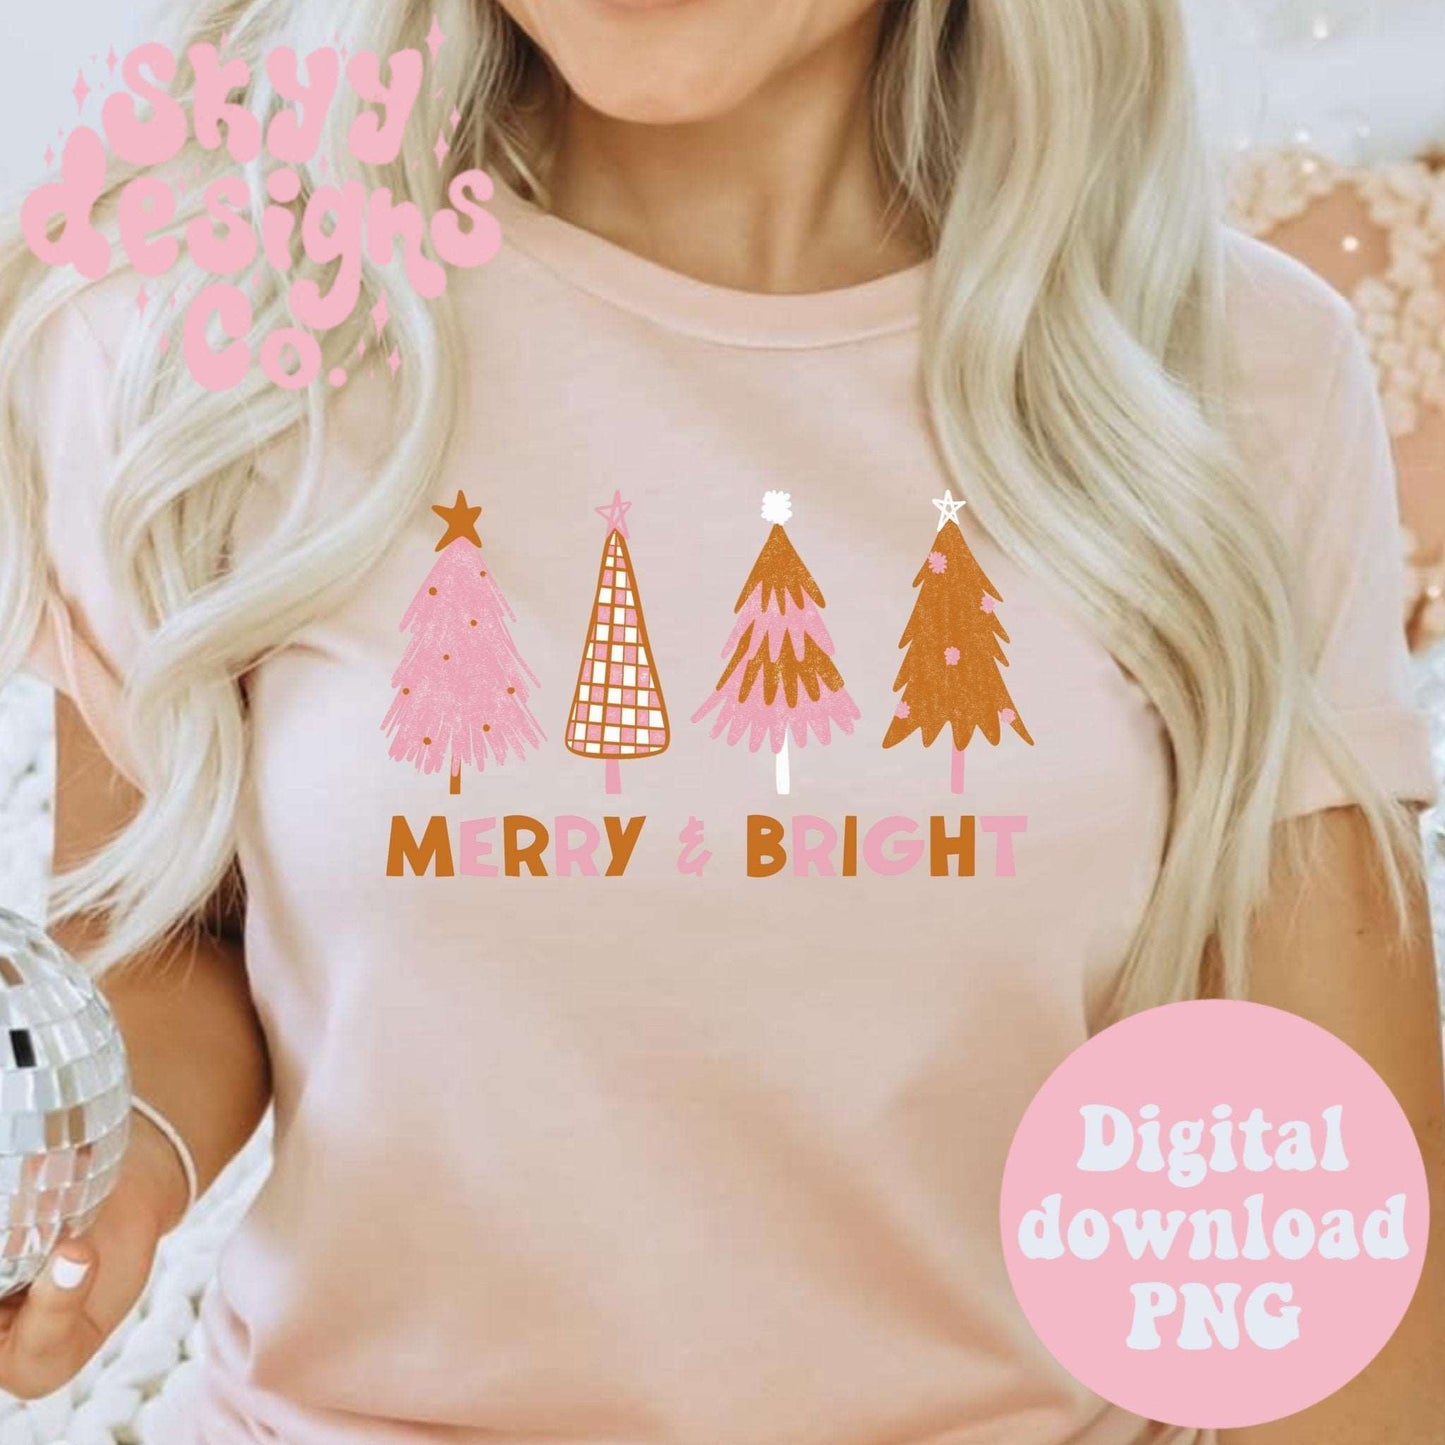 Merry & bright PNG - SkyyDesignsCo